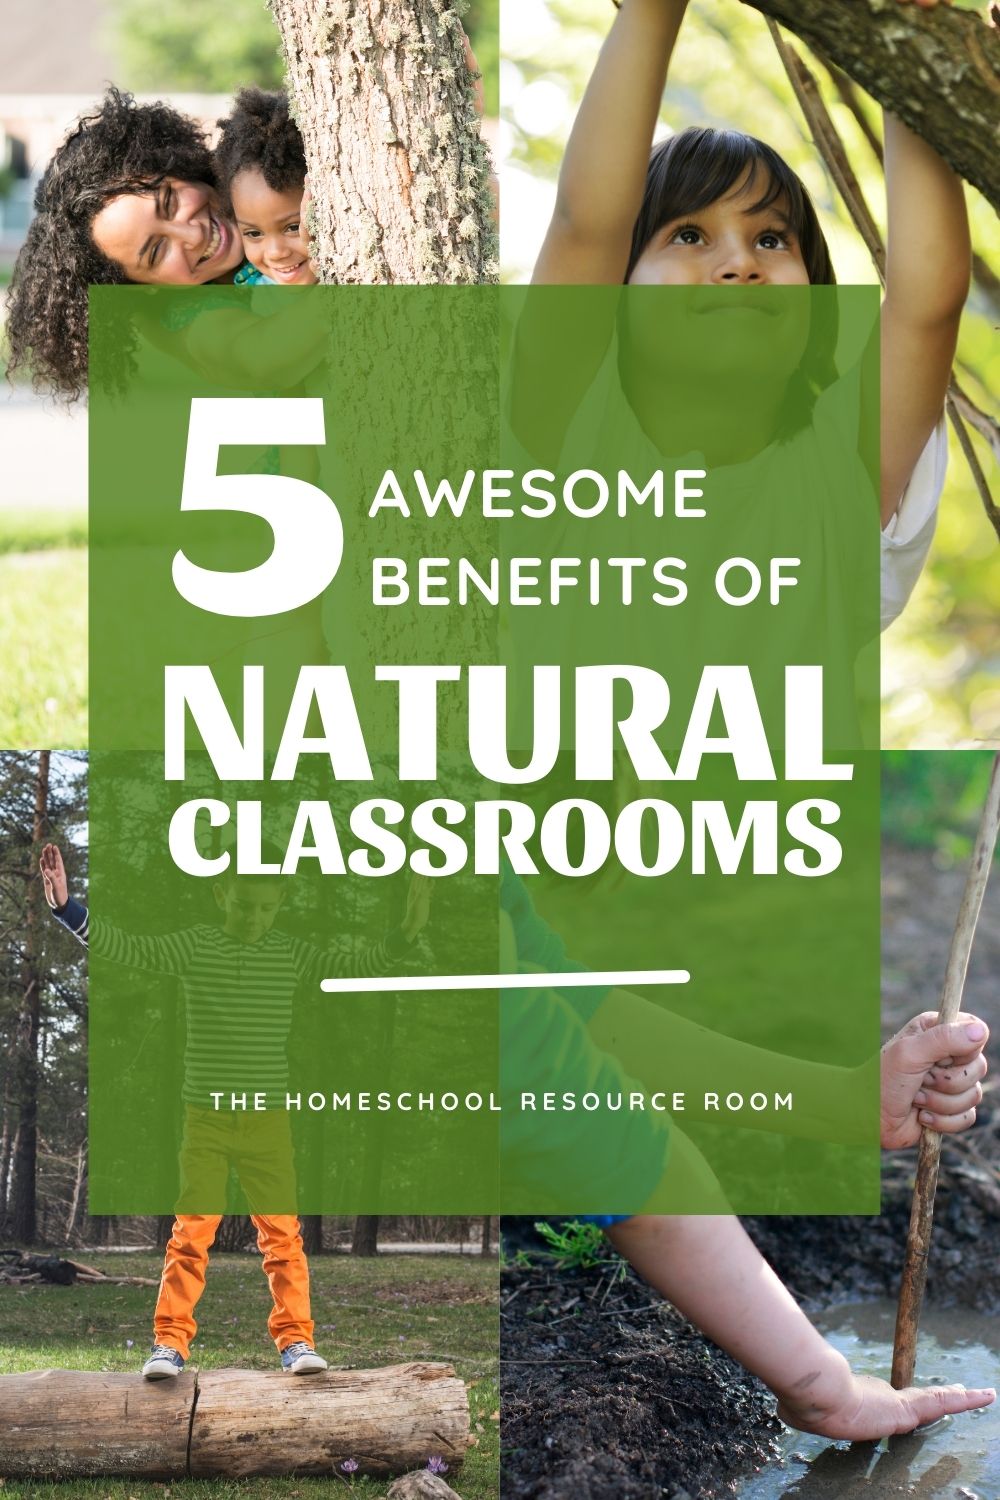 5 awesome benefits of nature classrooms. Natural classrooms have many benefits. See how a new spin on your learning environment can impact your homeschool! #homeschool #natureclassroom #naturalclassroom